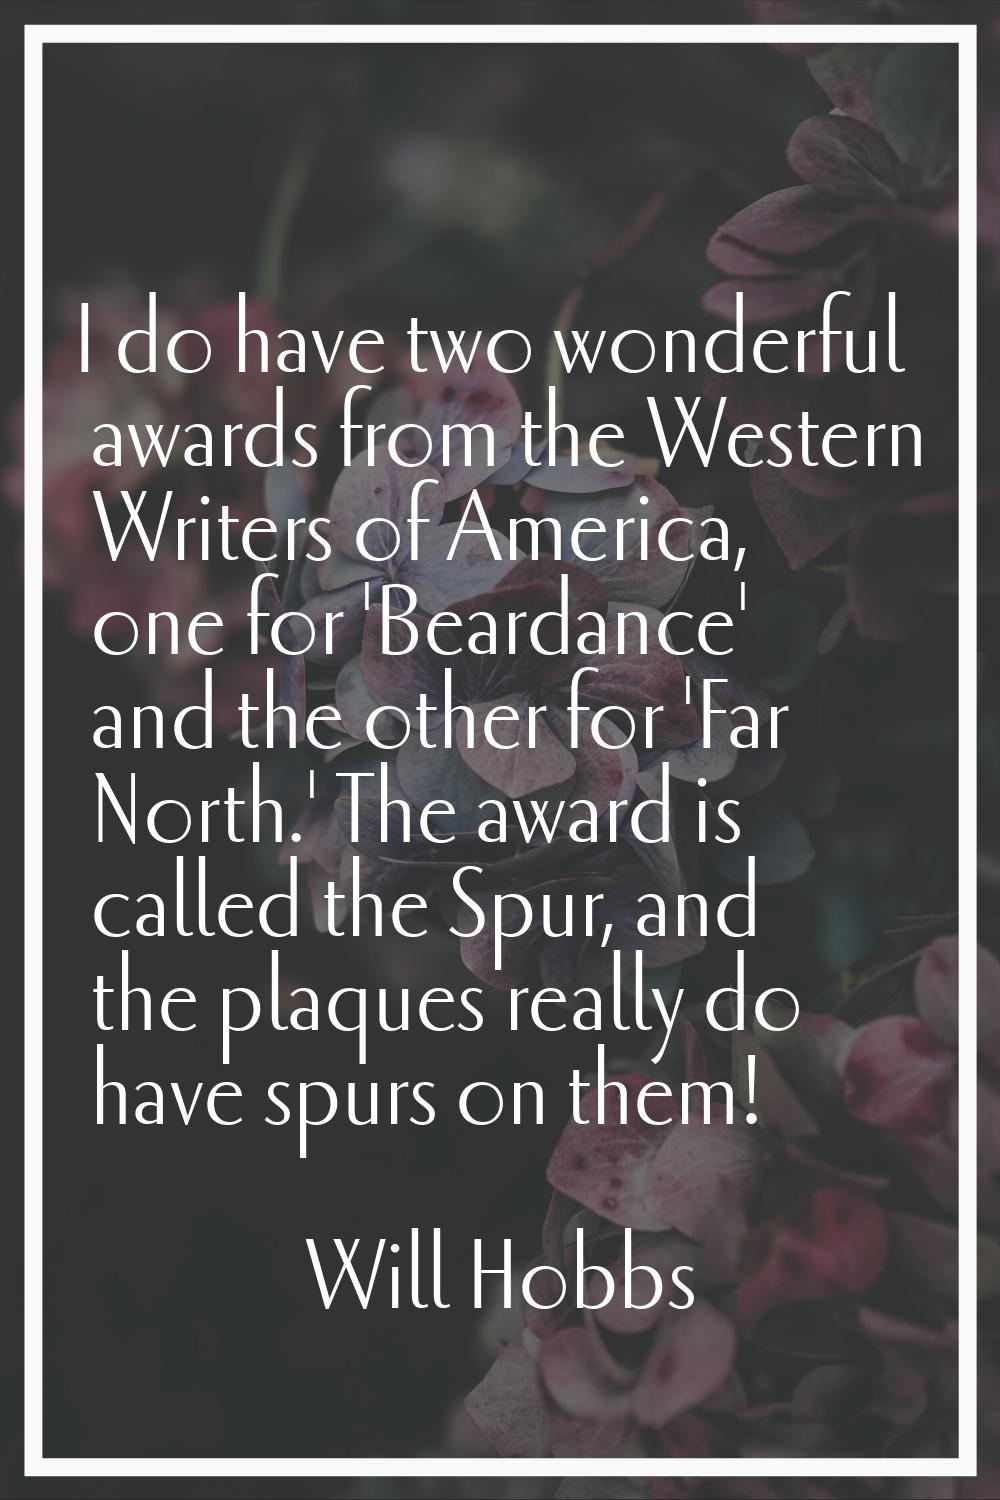 I do have two wonderful awards from the Western Writers of America, one for 'Beardance' and the oth